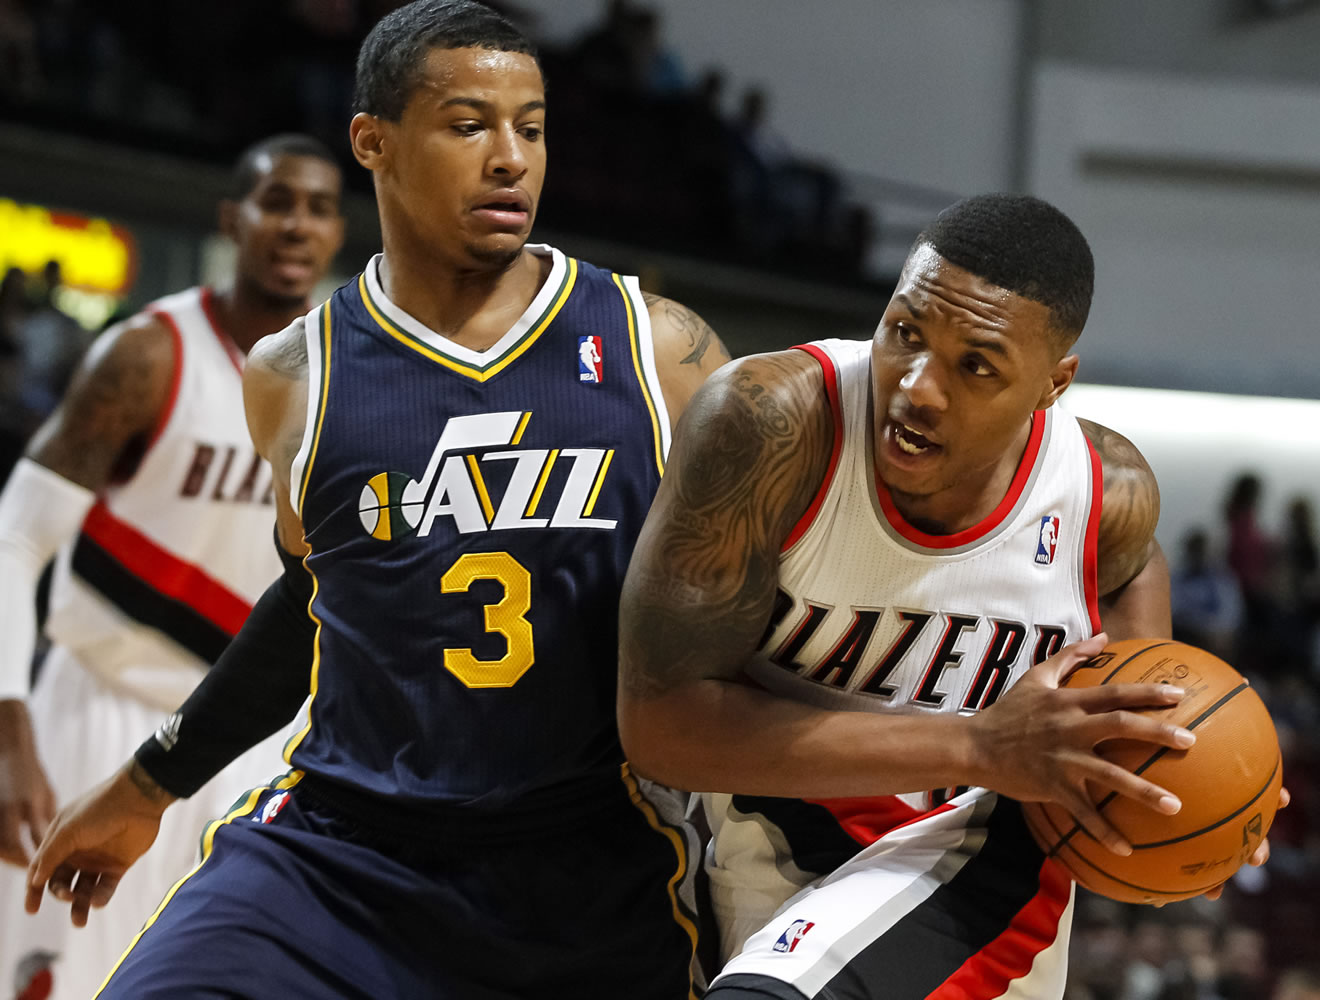 Portland Trail Blazers point guard Damian Lillard, right, drives the ball past Utah Jazz point guard Trey Burke (3) in the first half of a preseason game on Friday at Boise, Idaho.